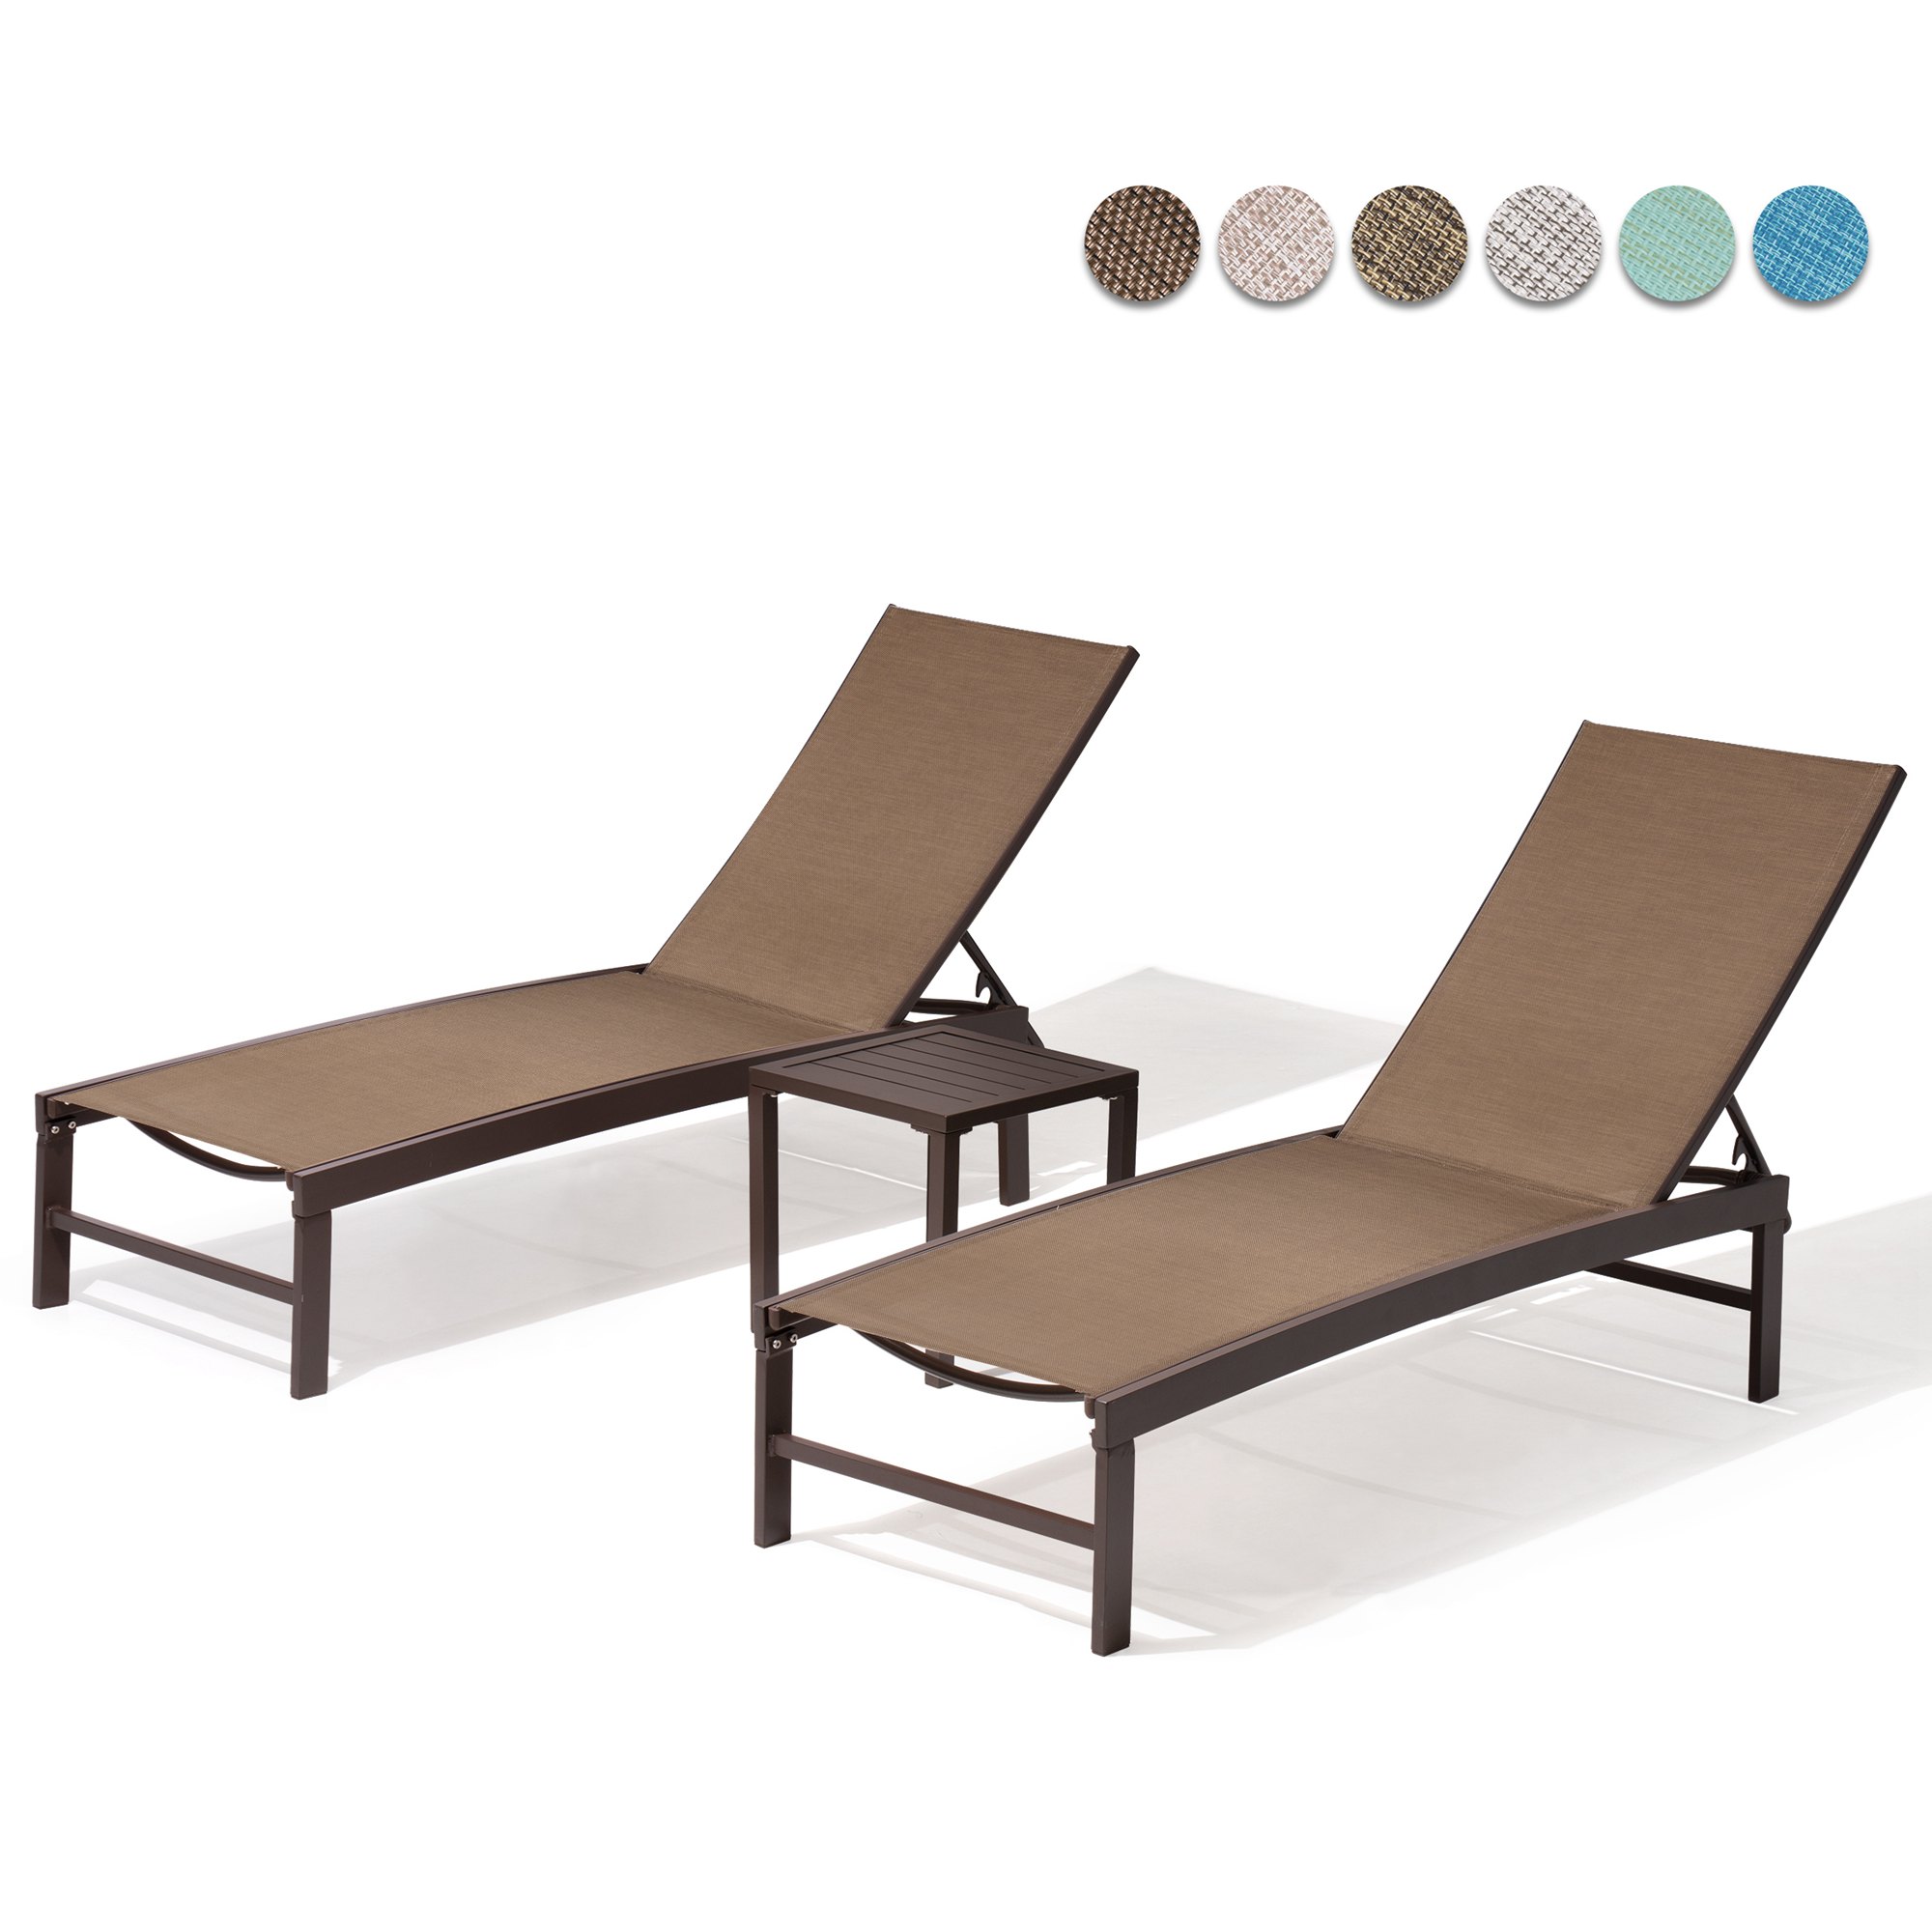 Pellebant Set of 3 Outdoor Chaise Lounge Aluminum Adjustable Patio Chairs With Table,Brown - image 1 of 10